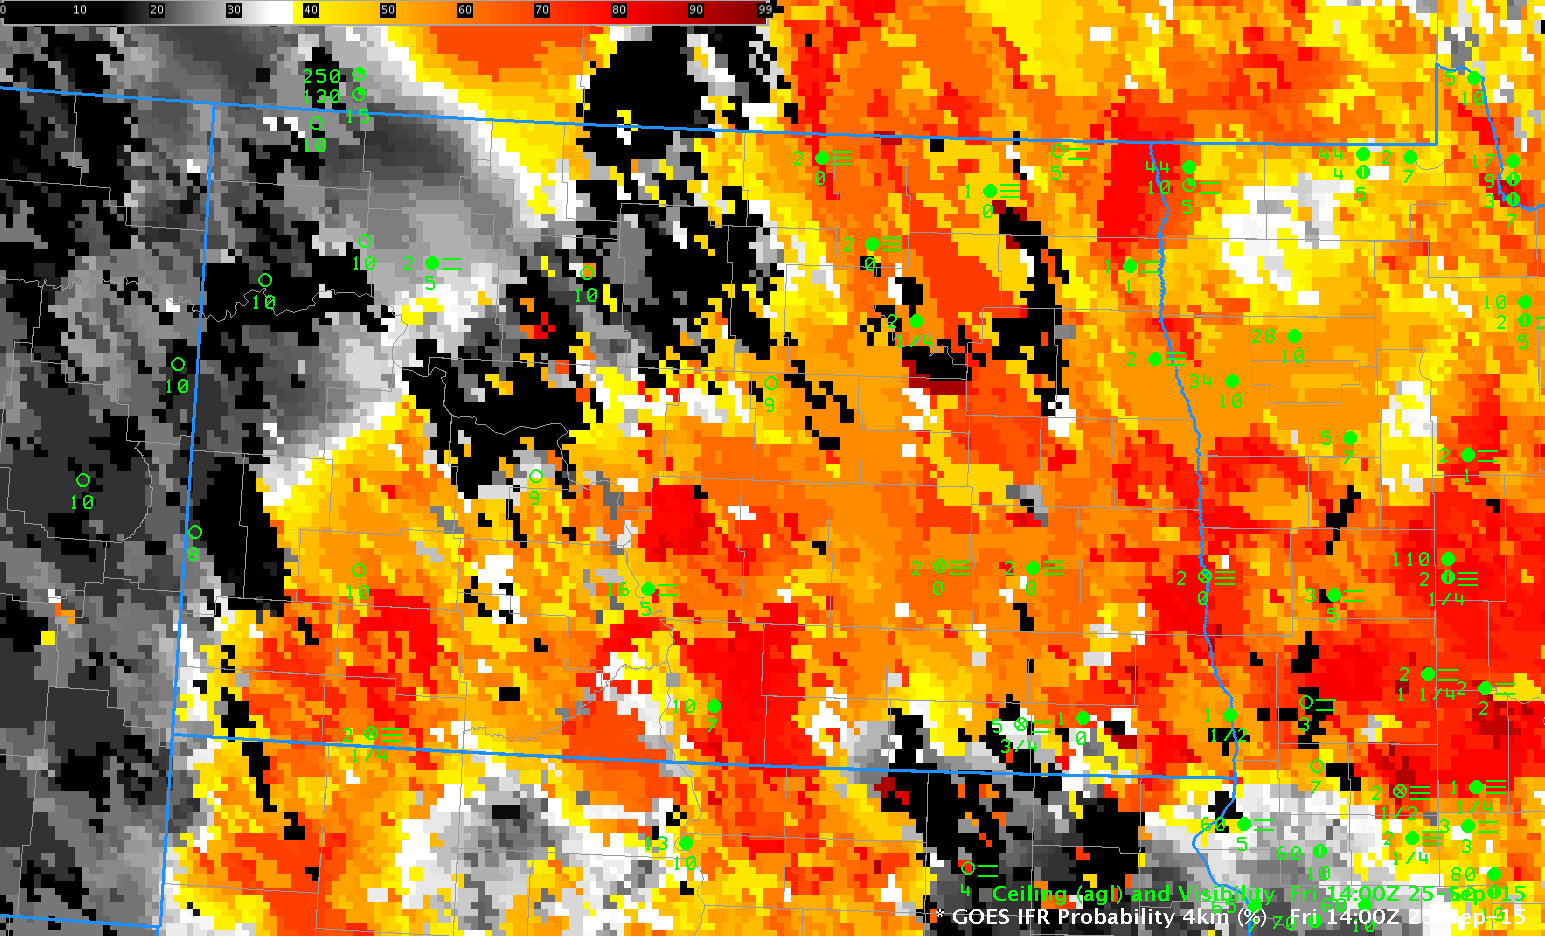 GOES-R IFR Probability fields, 1300-1515 UTC on 25 September 2015 [click to play animation]